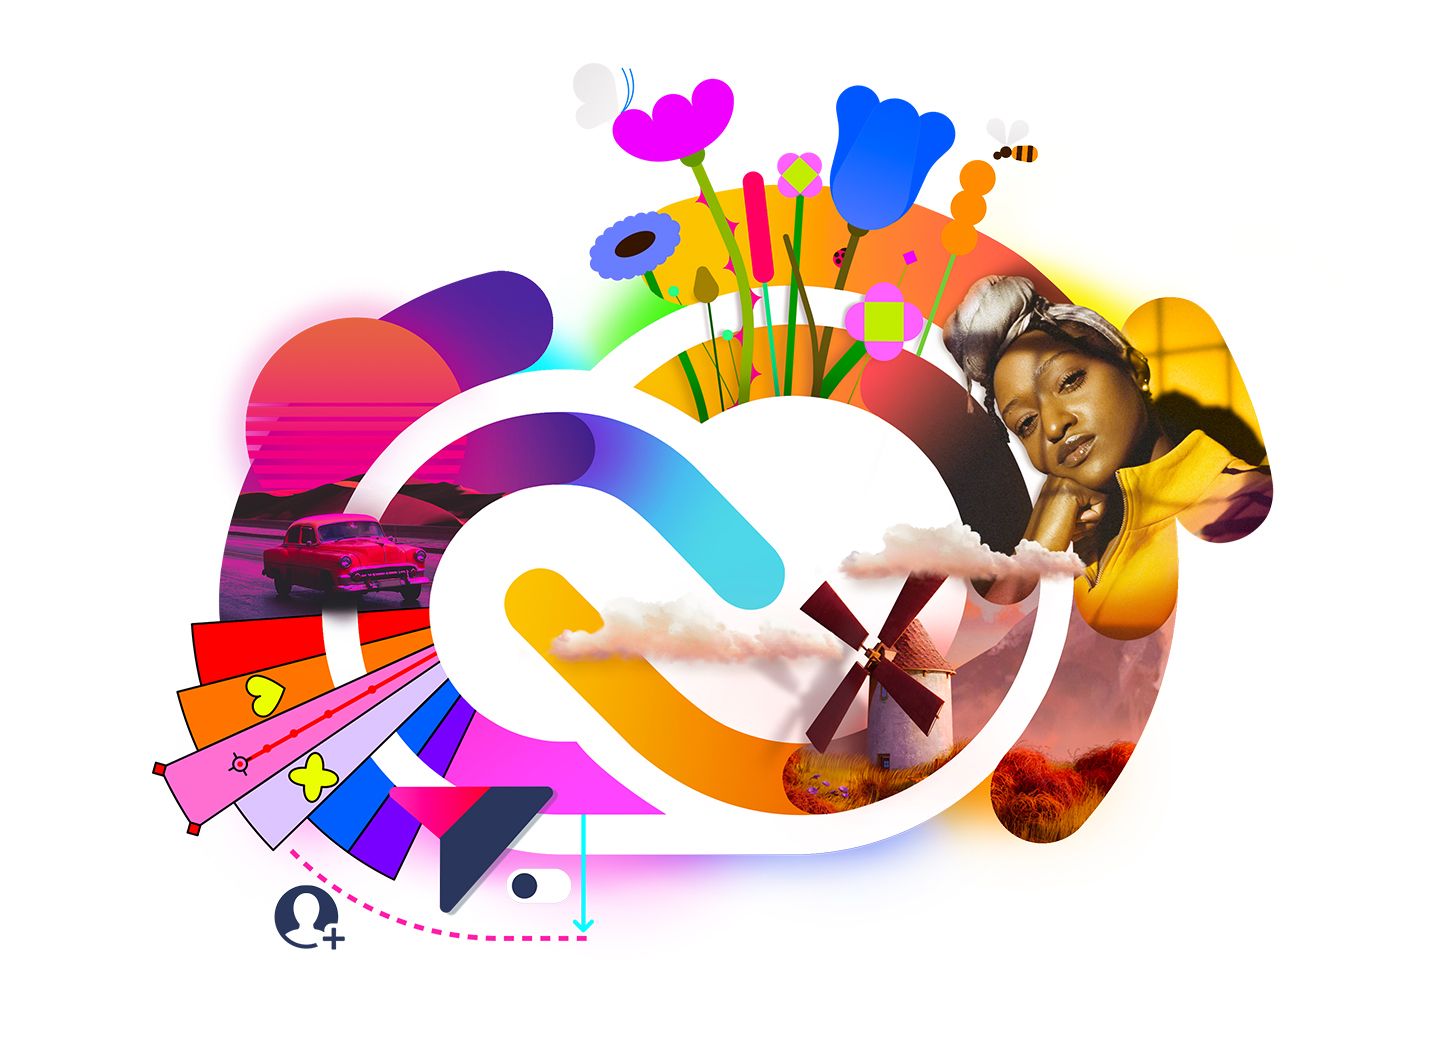 Adobe Creative Cloud | Details and products | Adobe